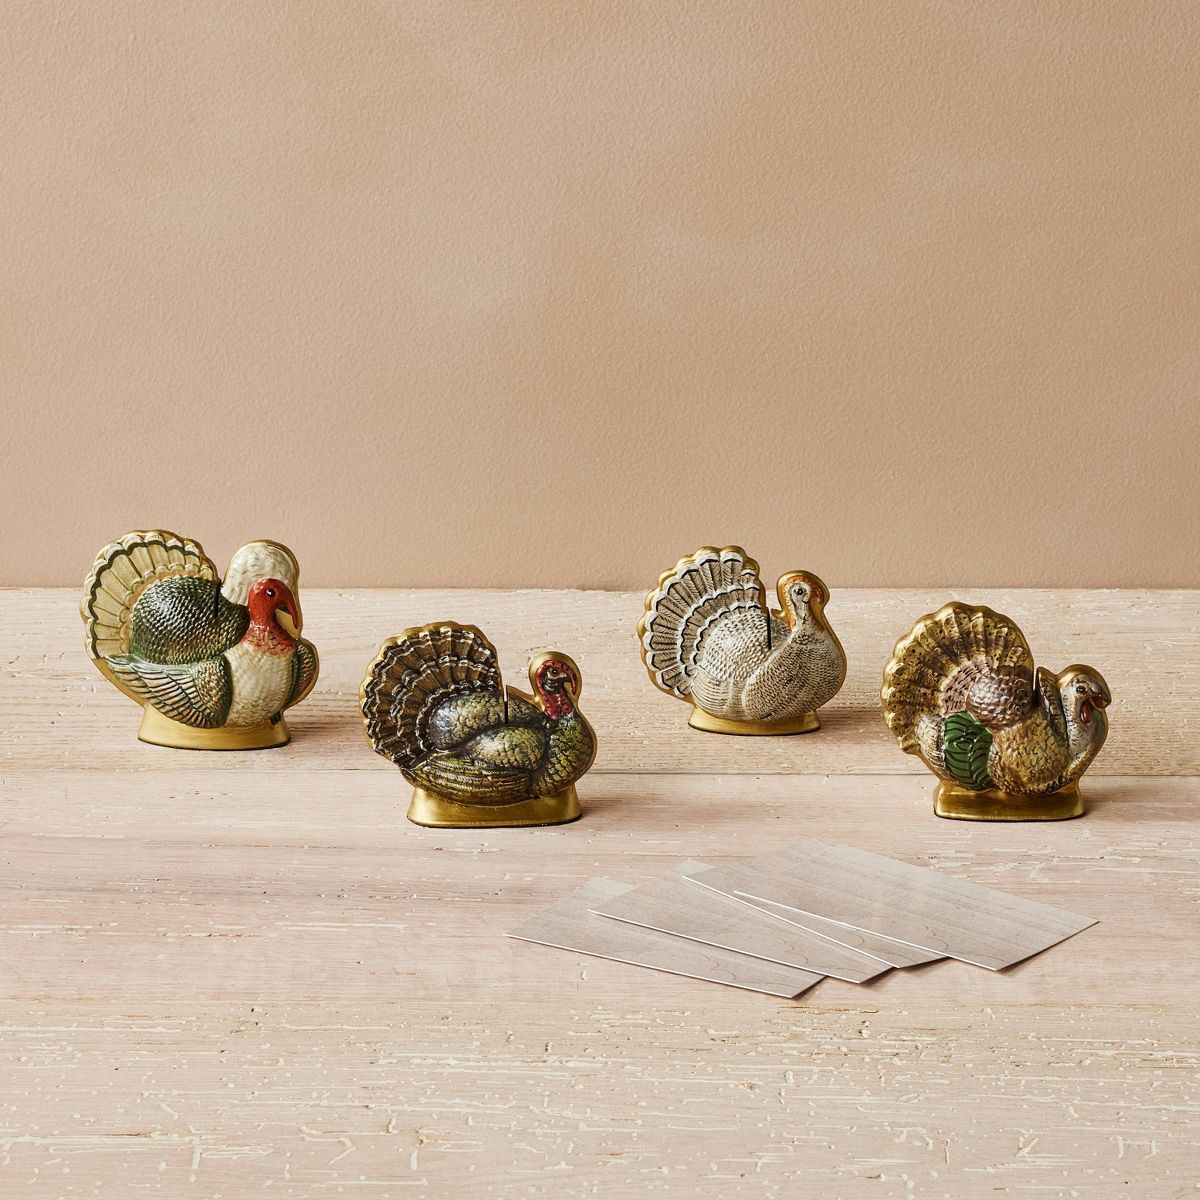 4pc Fall Turkey Placeholder Set with Name Cards - John Derian for Target | Target